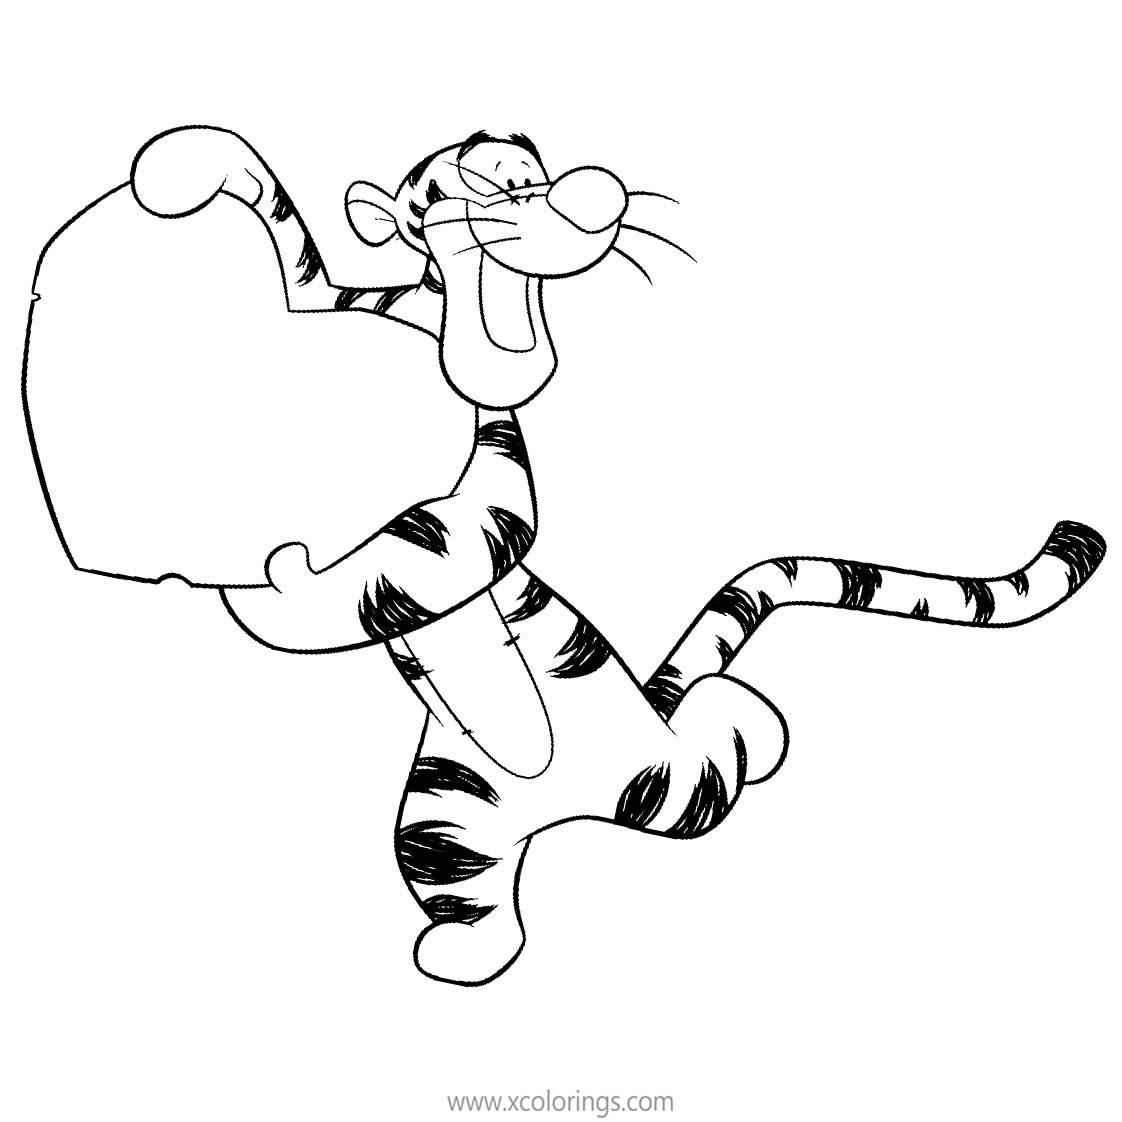 Free Winnie the Pooh Valentines Coloring Pages Tigger with Heart printable